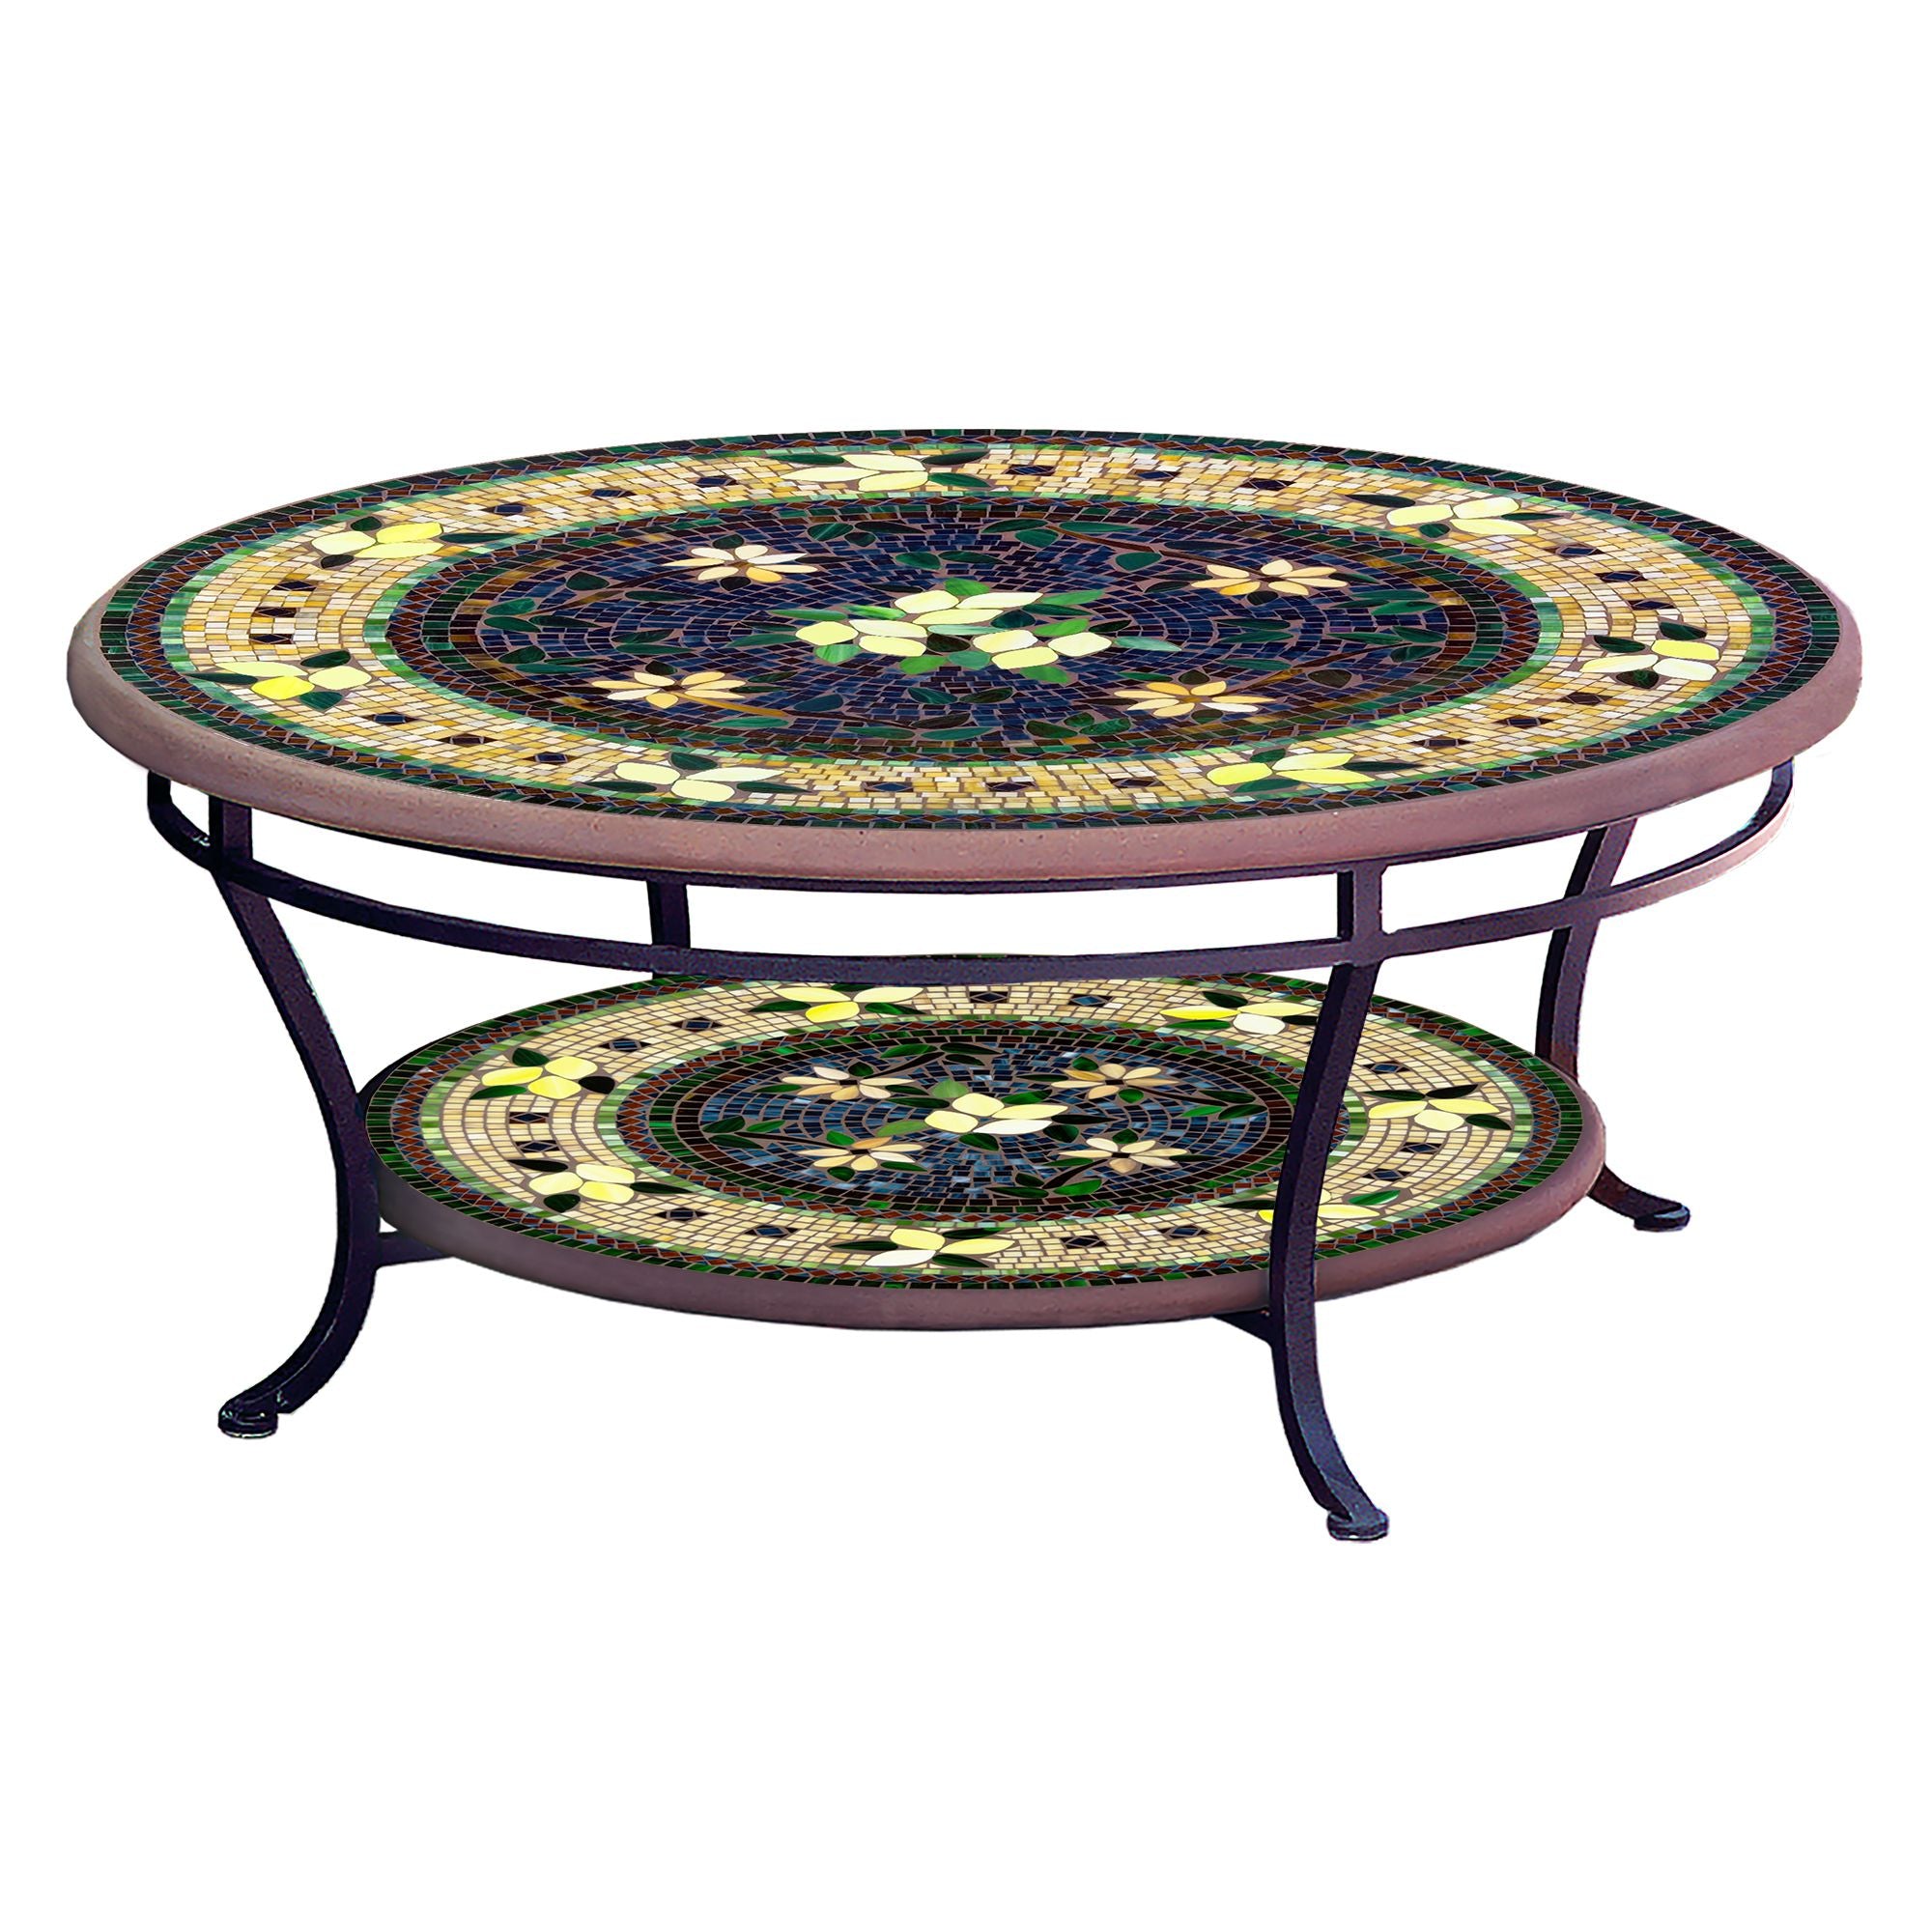 Tuscan Lemons Mosaic Coffee Table - Tiered-Iron Accents